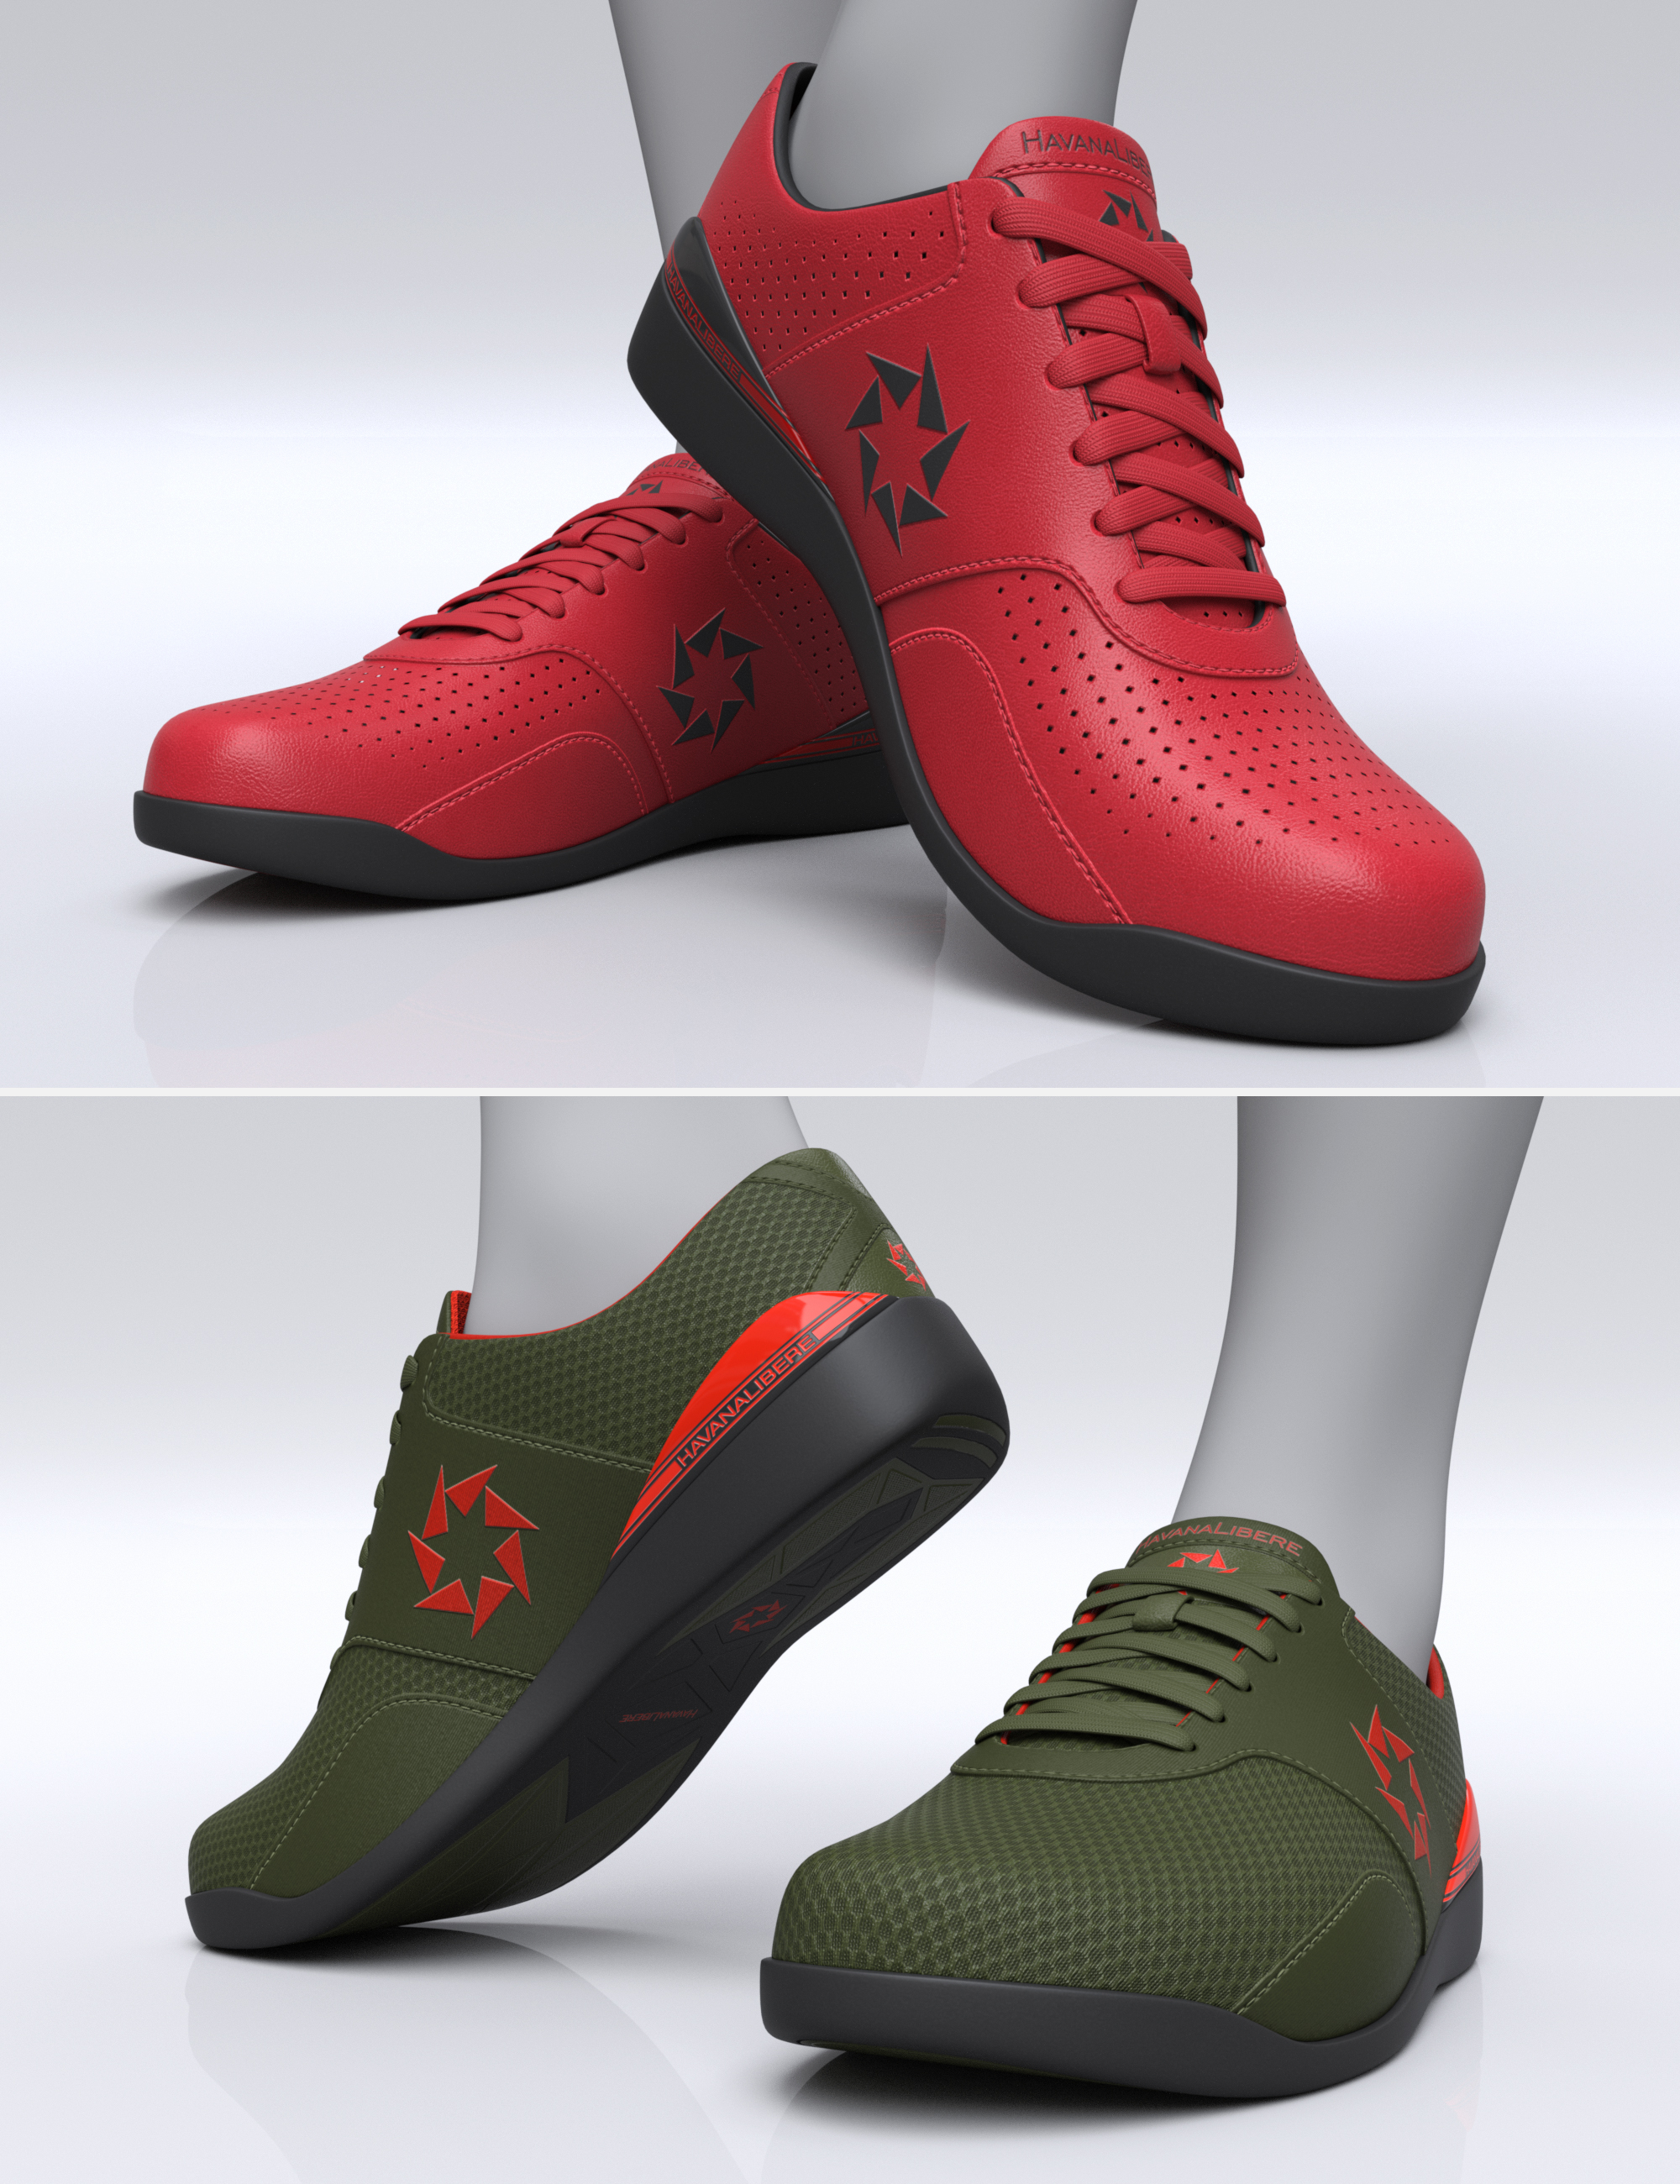 HL PD 550 Sneakers for Genesis 9, 8, and 8.1 by: Havanalibere, 3D Models by Daz 3D